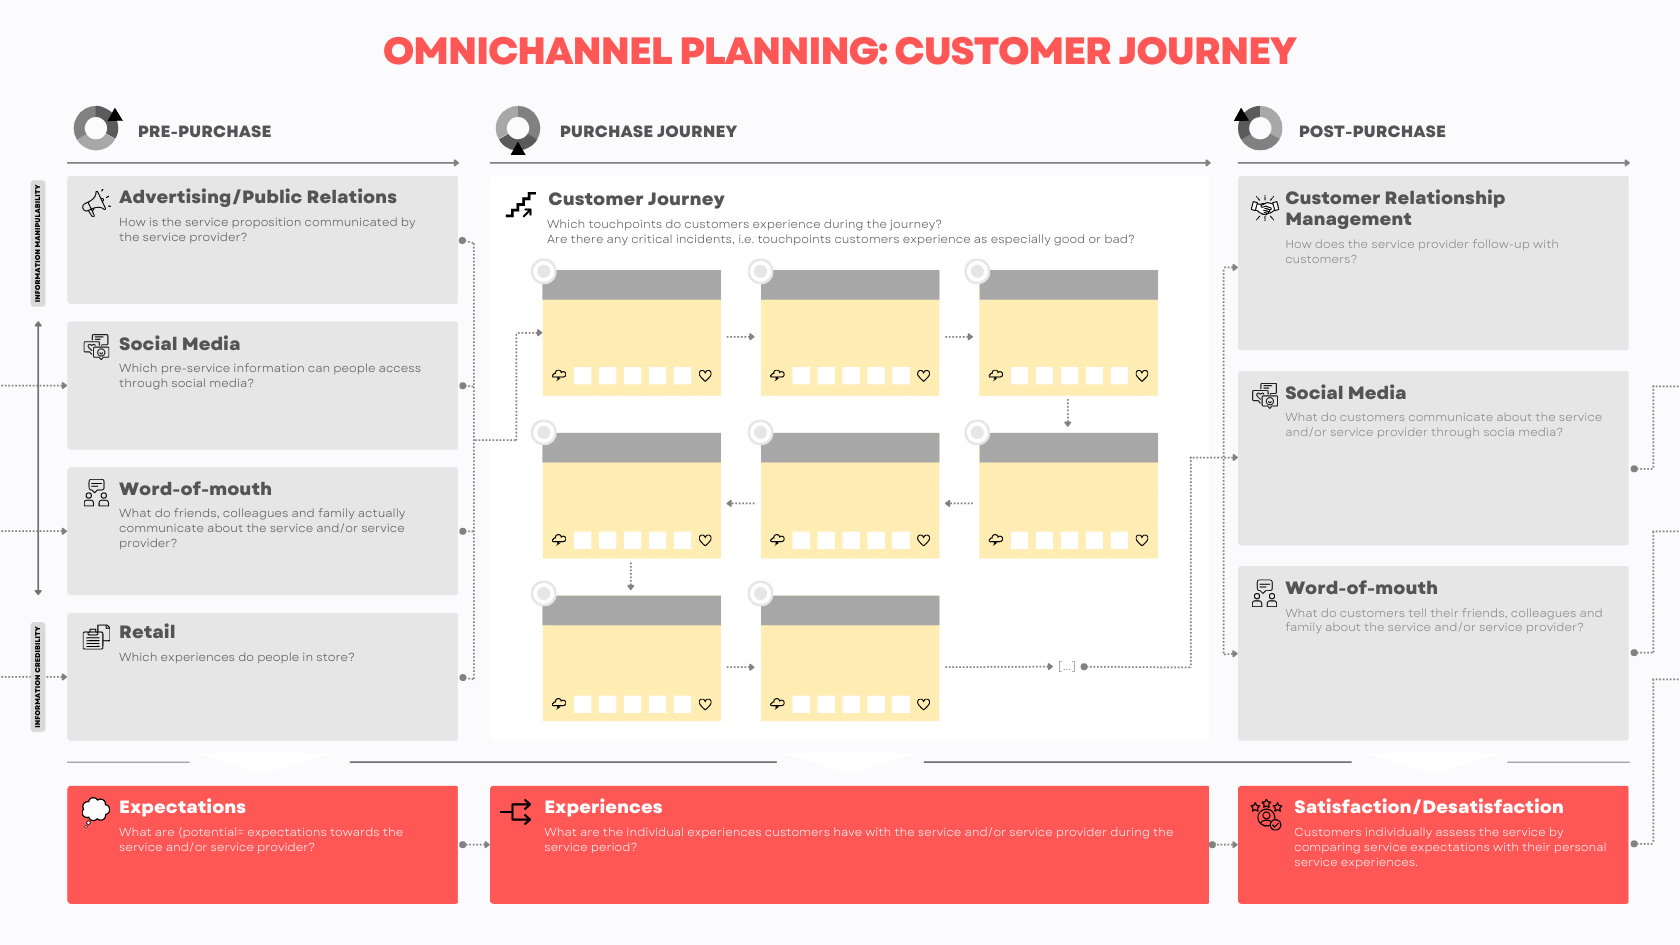 Planning for omnichannel marketing is no easy task. Internally, you must collaborate with other marketing teams and regions to ensure consistency across the board.